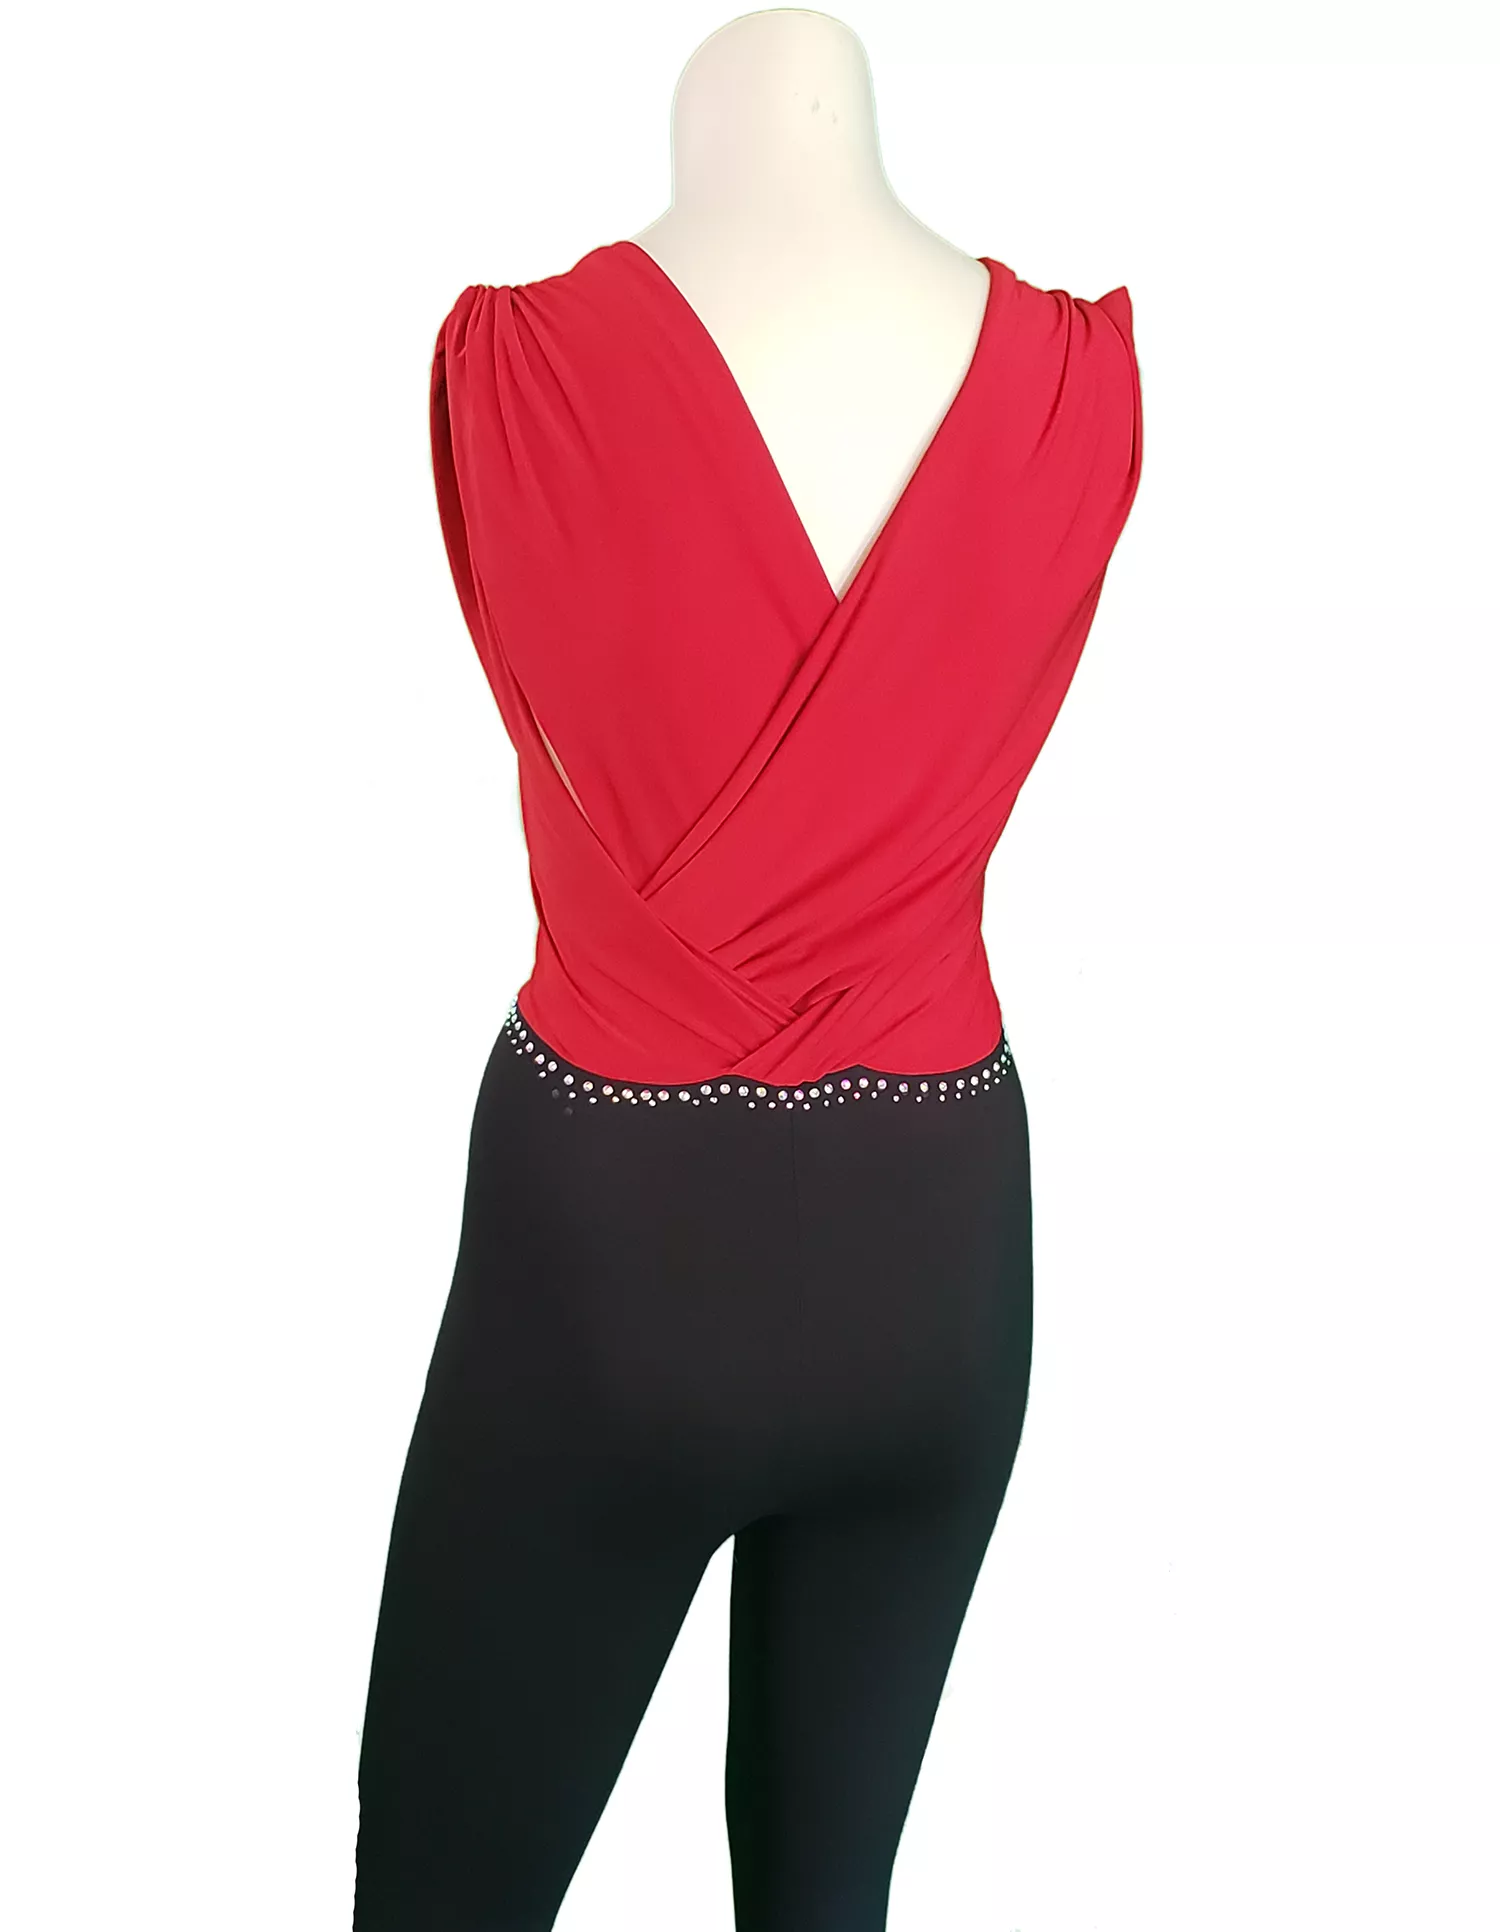 Red jumpsuit top - back